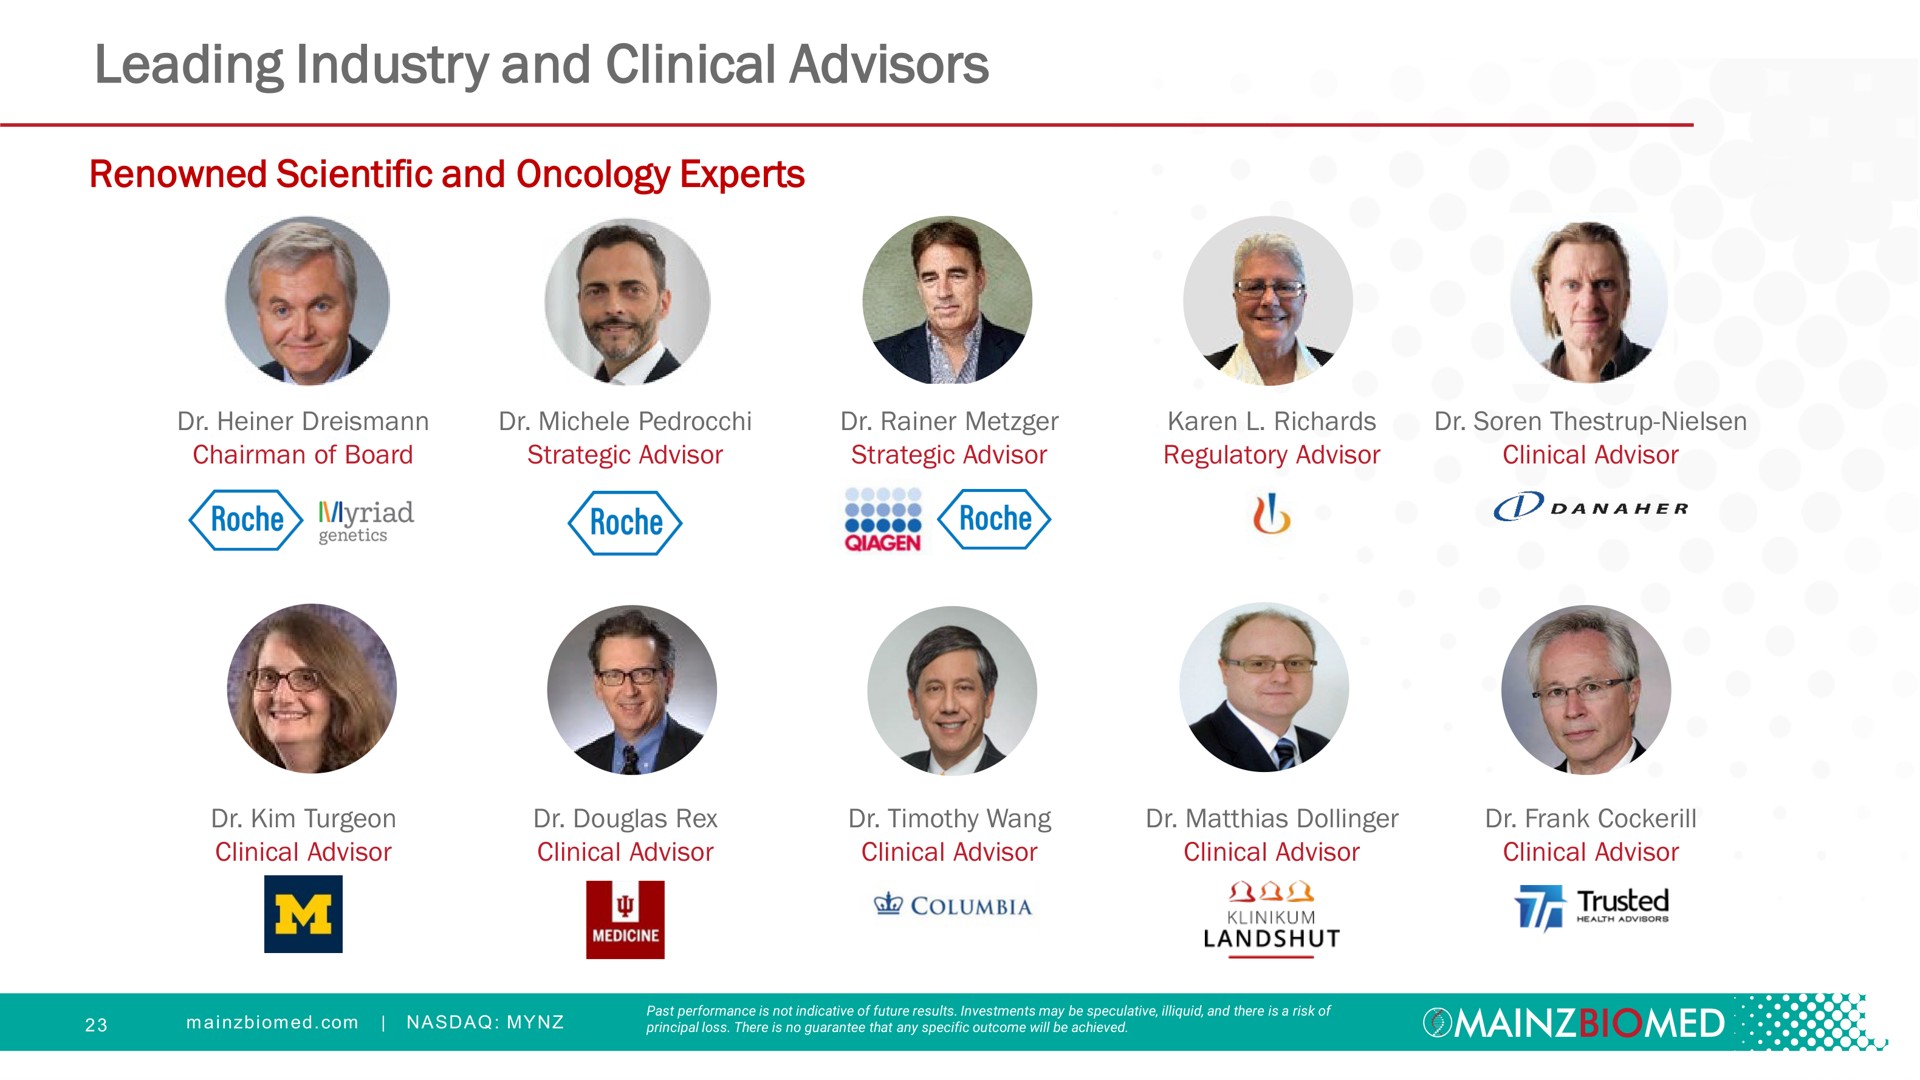 leading industry and clinical advisors | Mainz Biomed NV